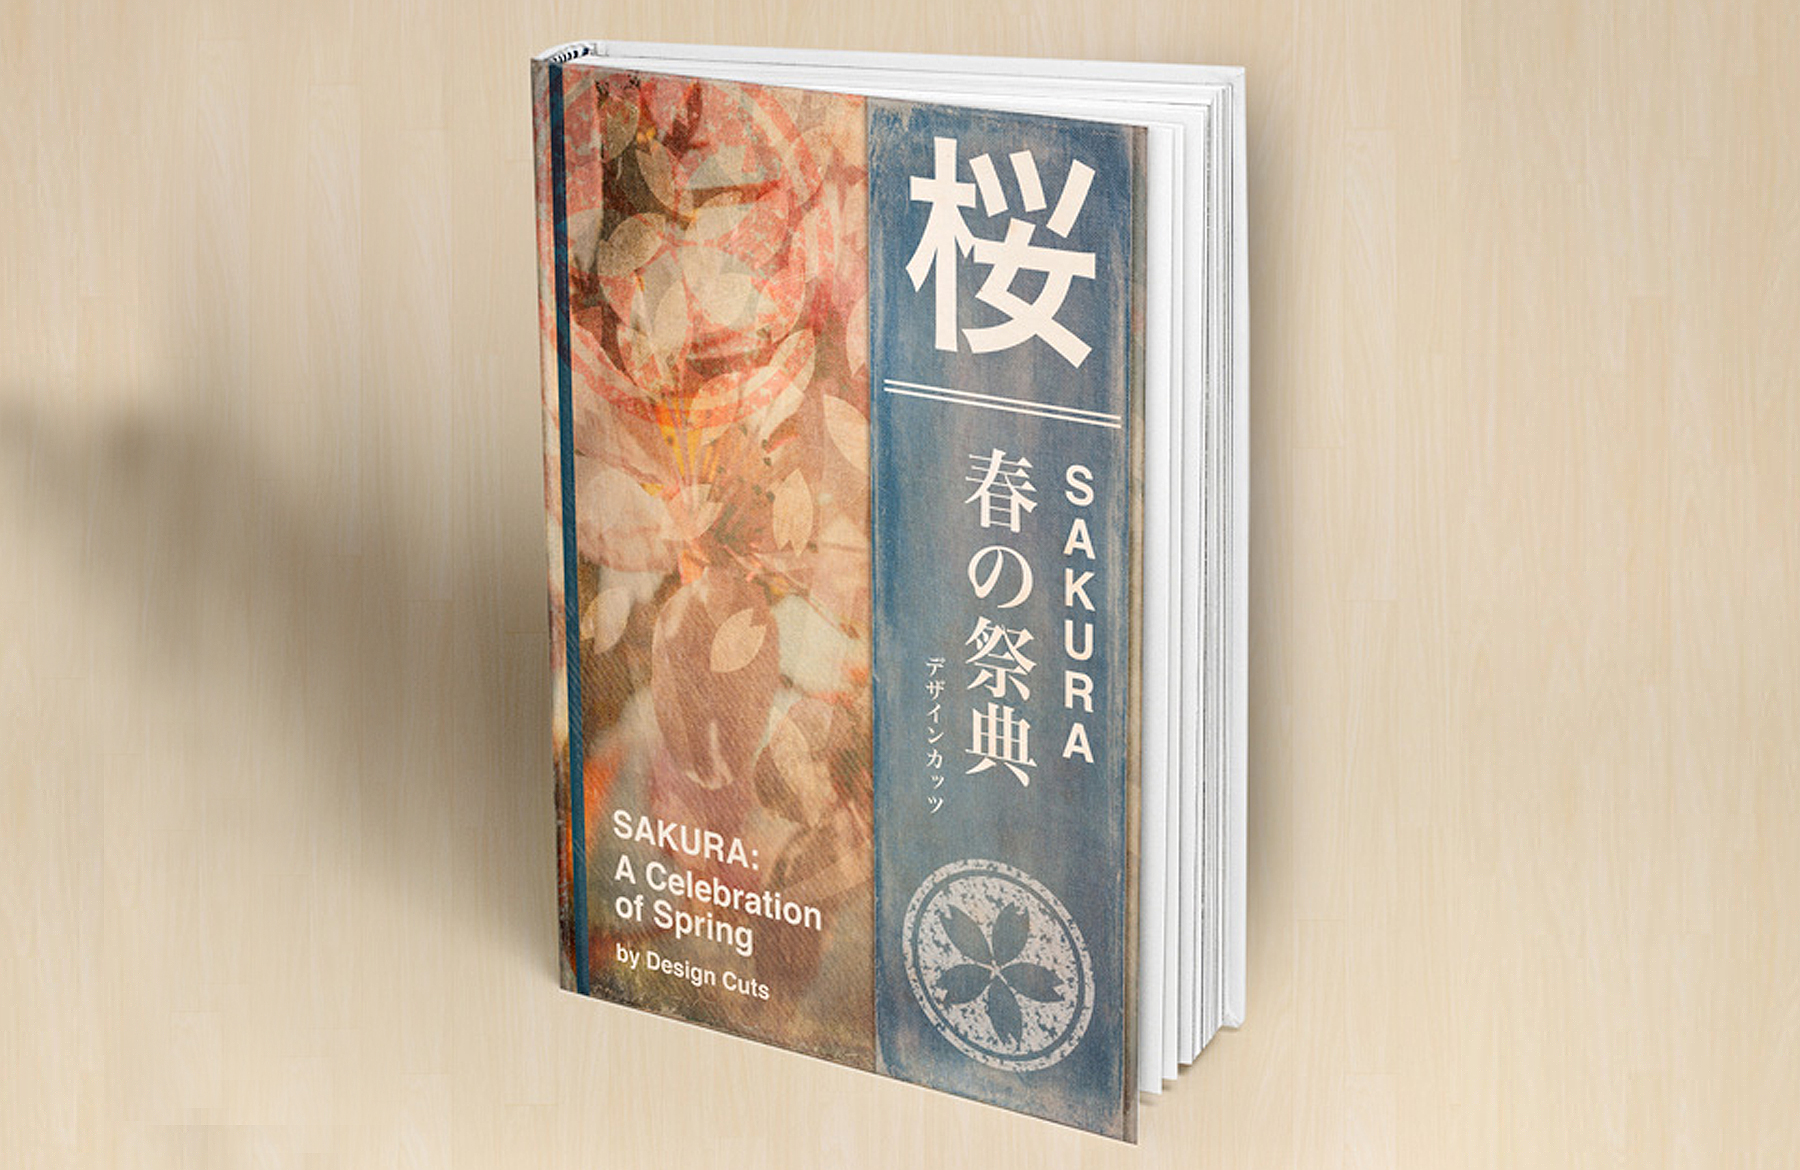 Create a Richly Textured Japanese Book Cover Design - Design Cuts